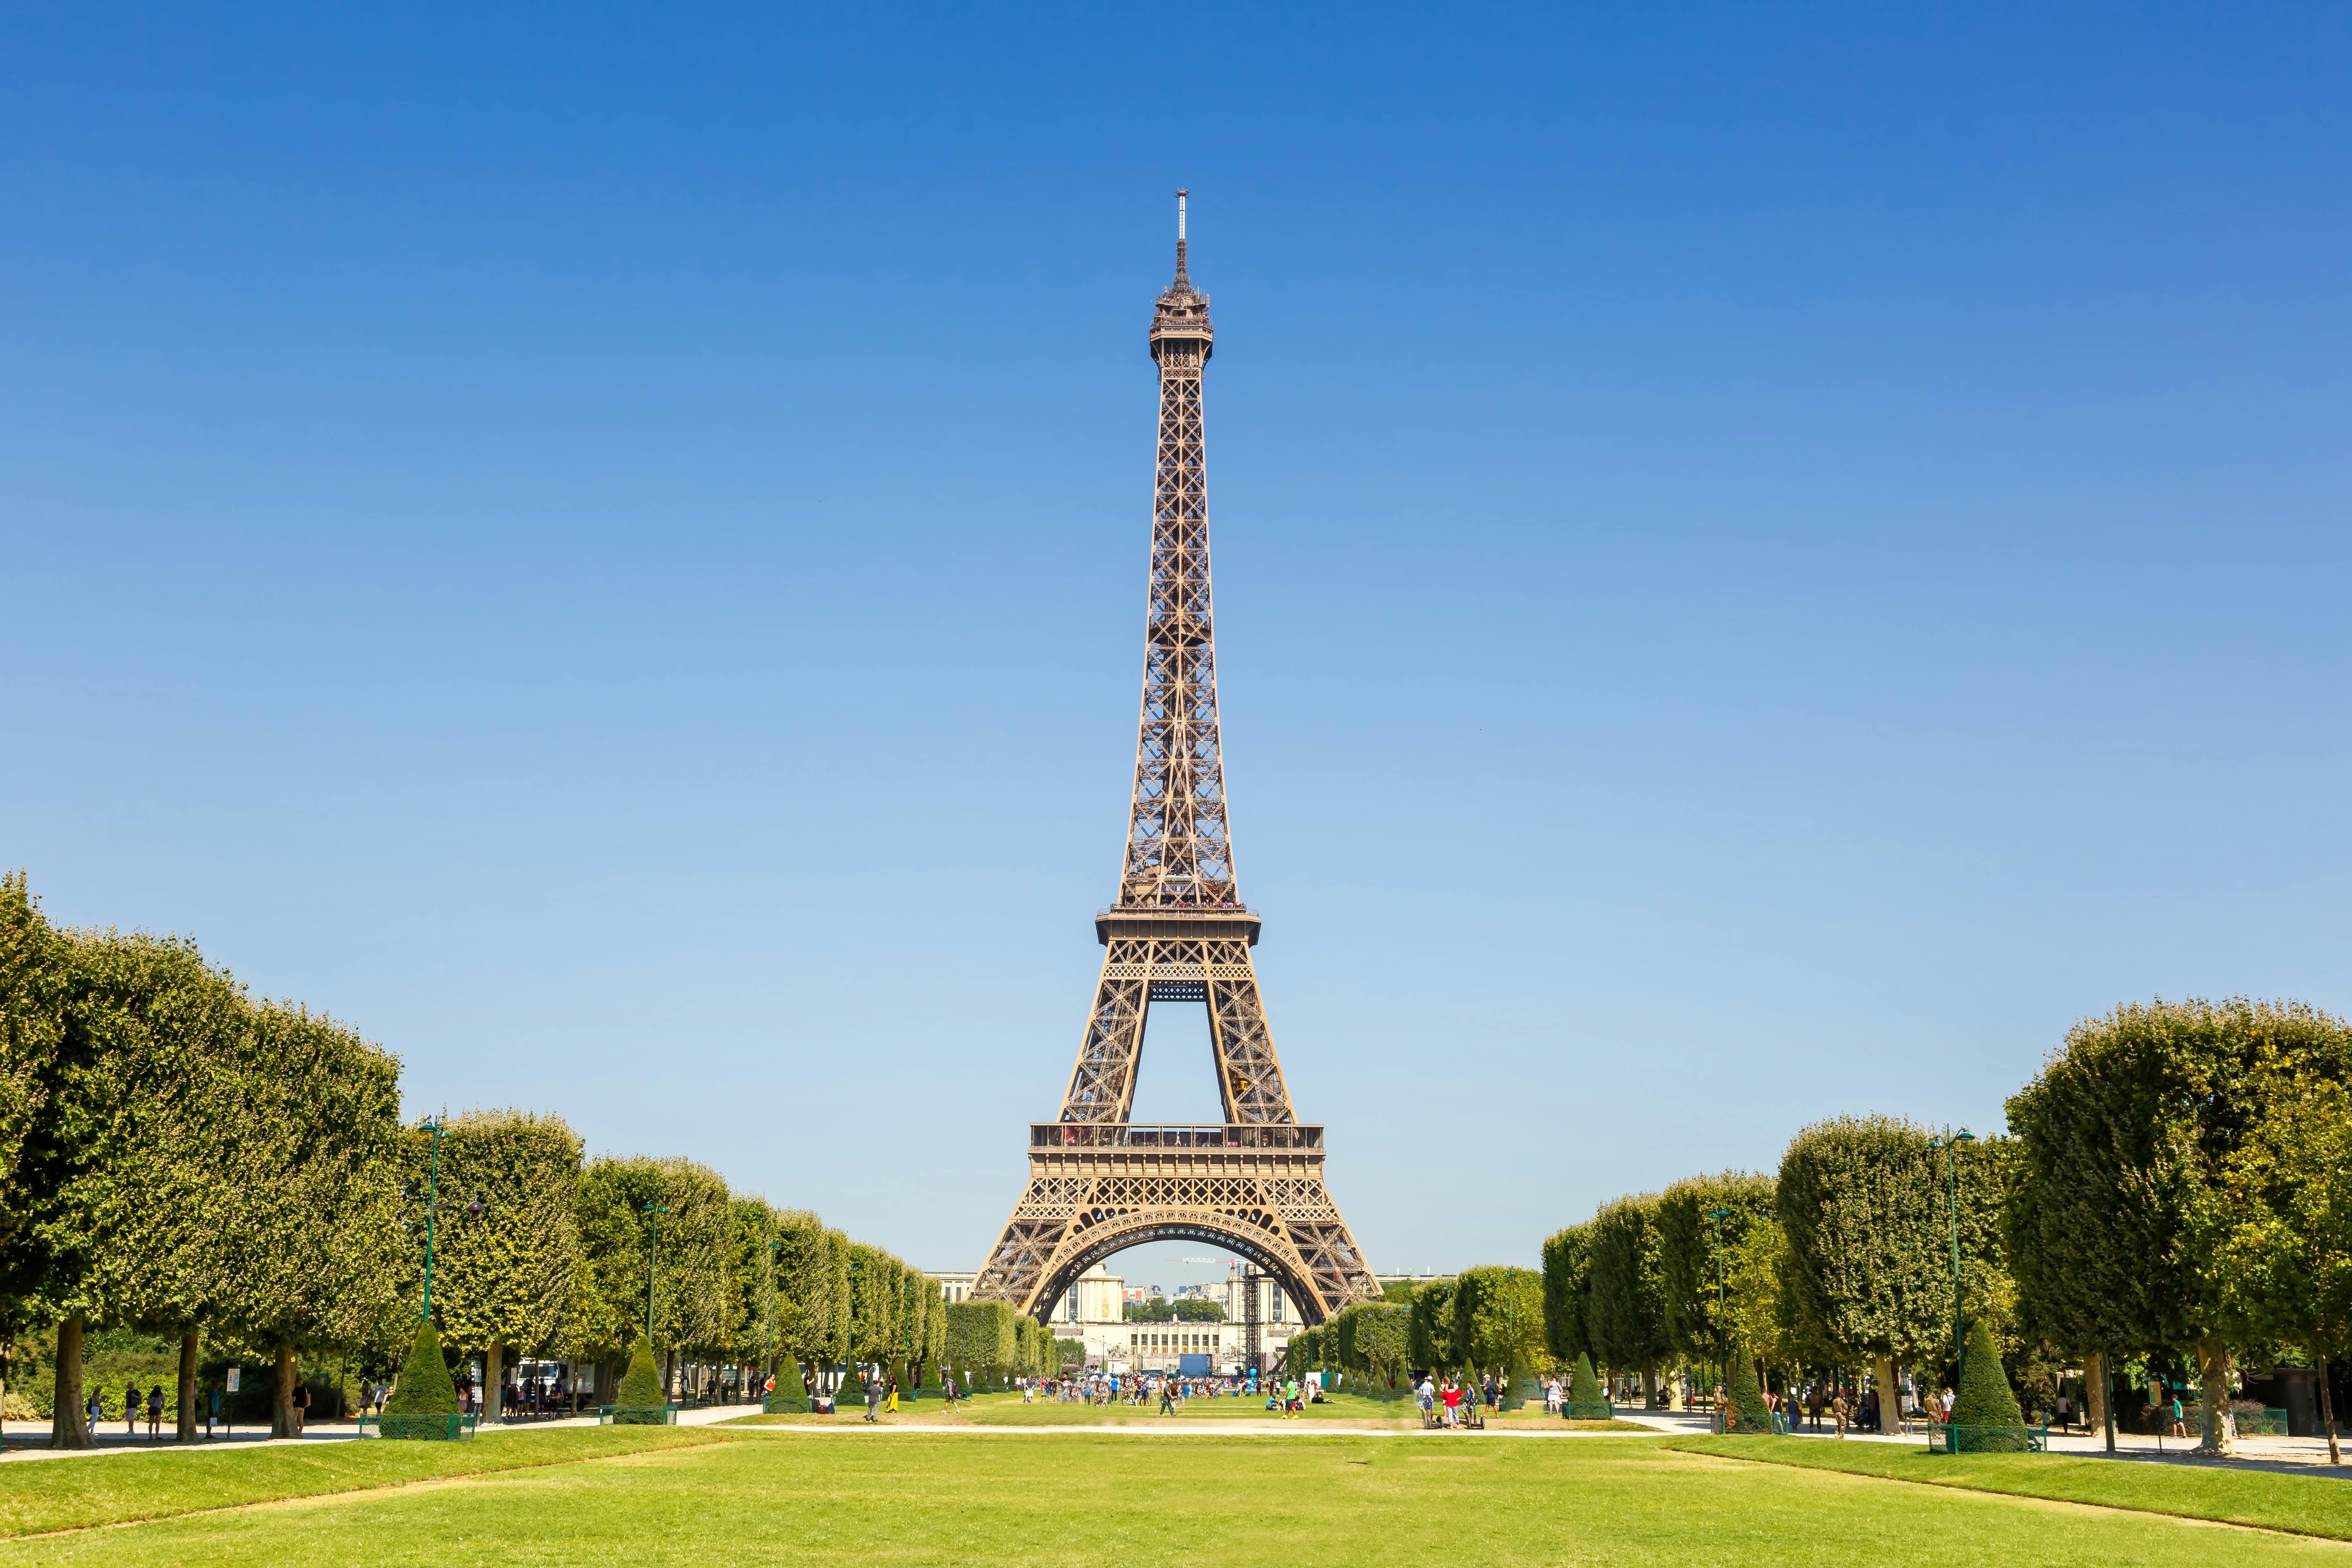 One day guided tour of Paris from London